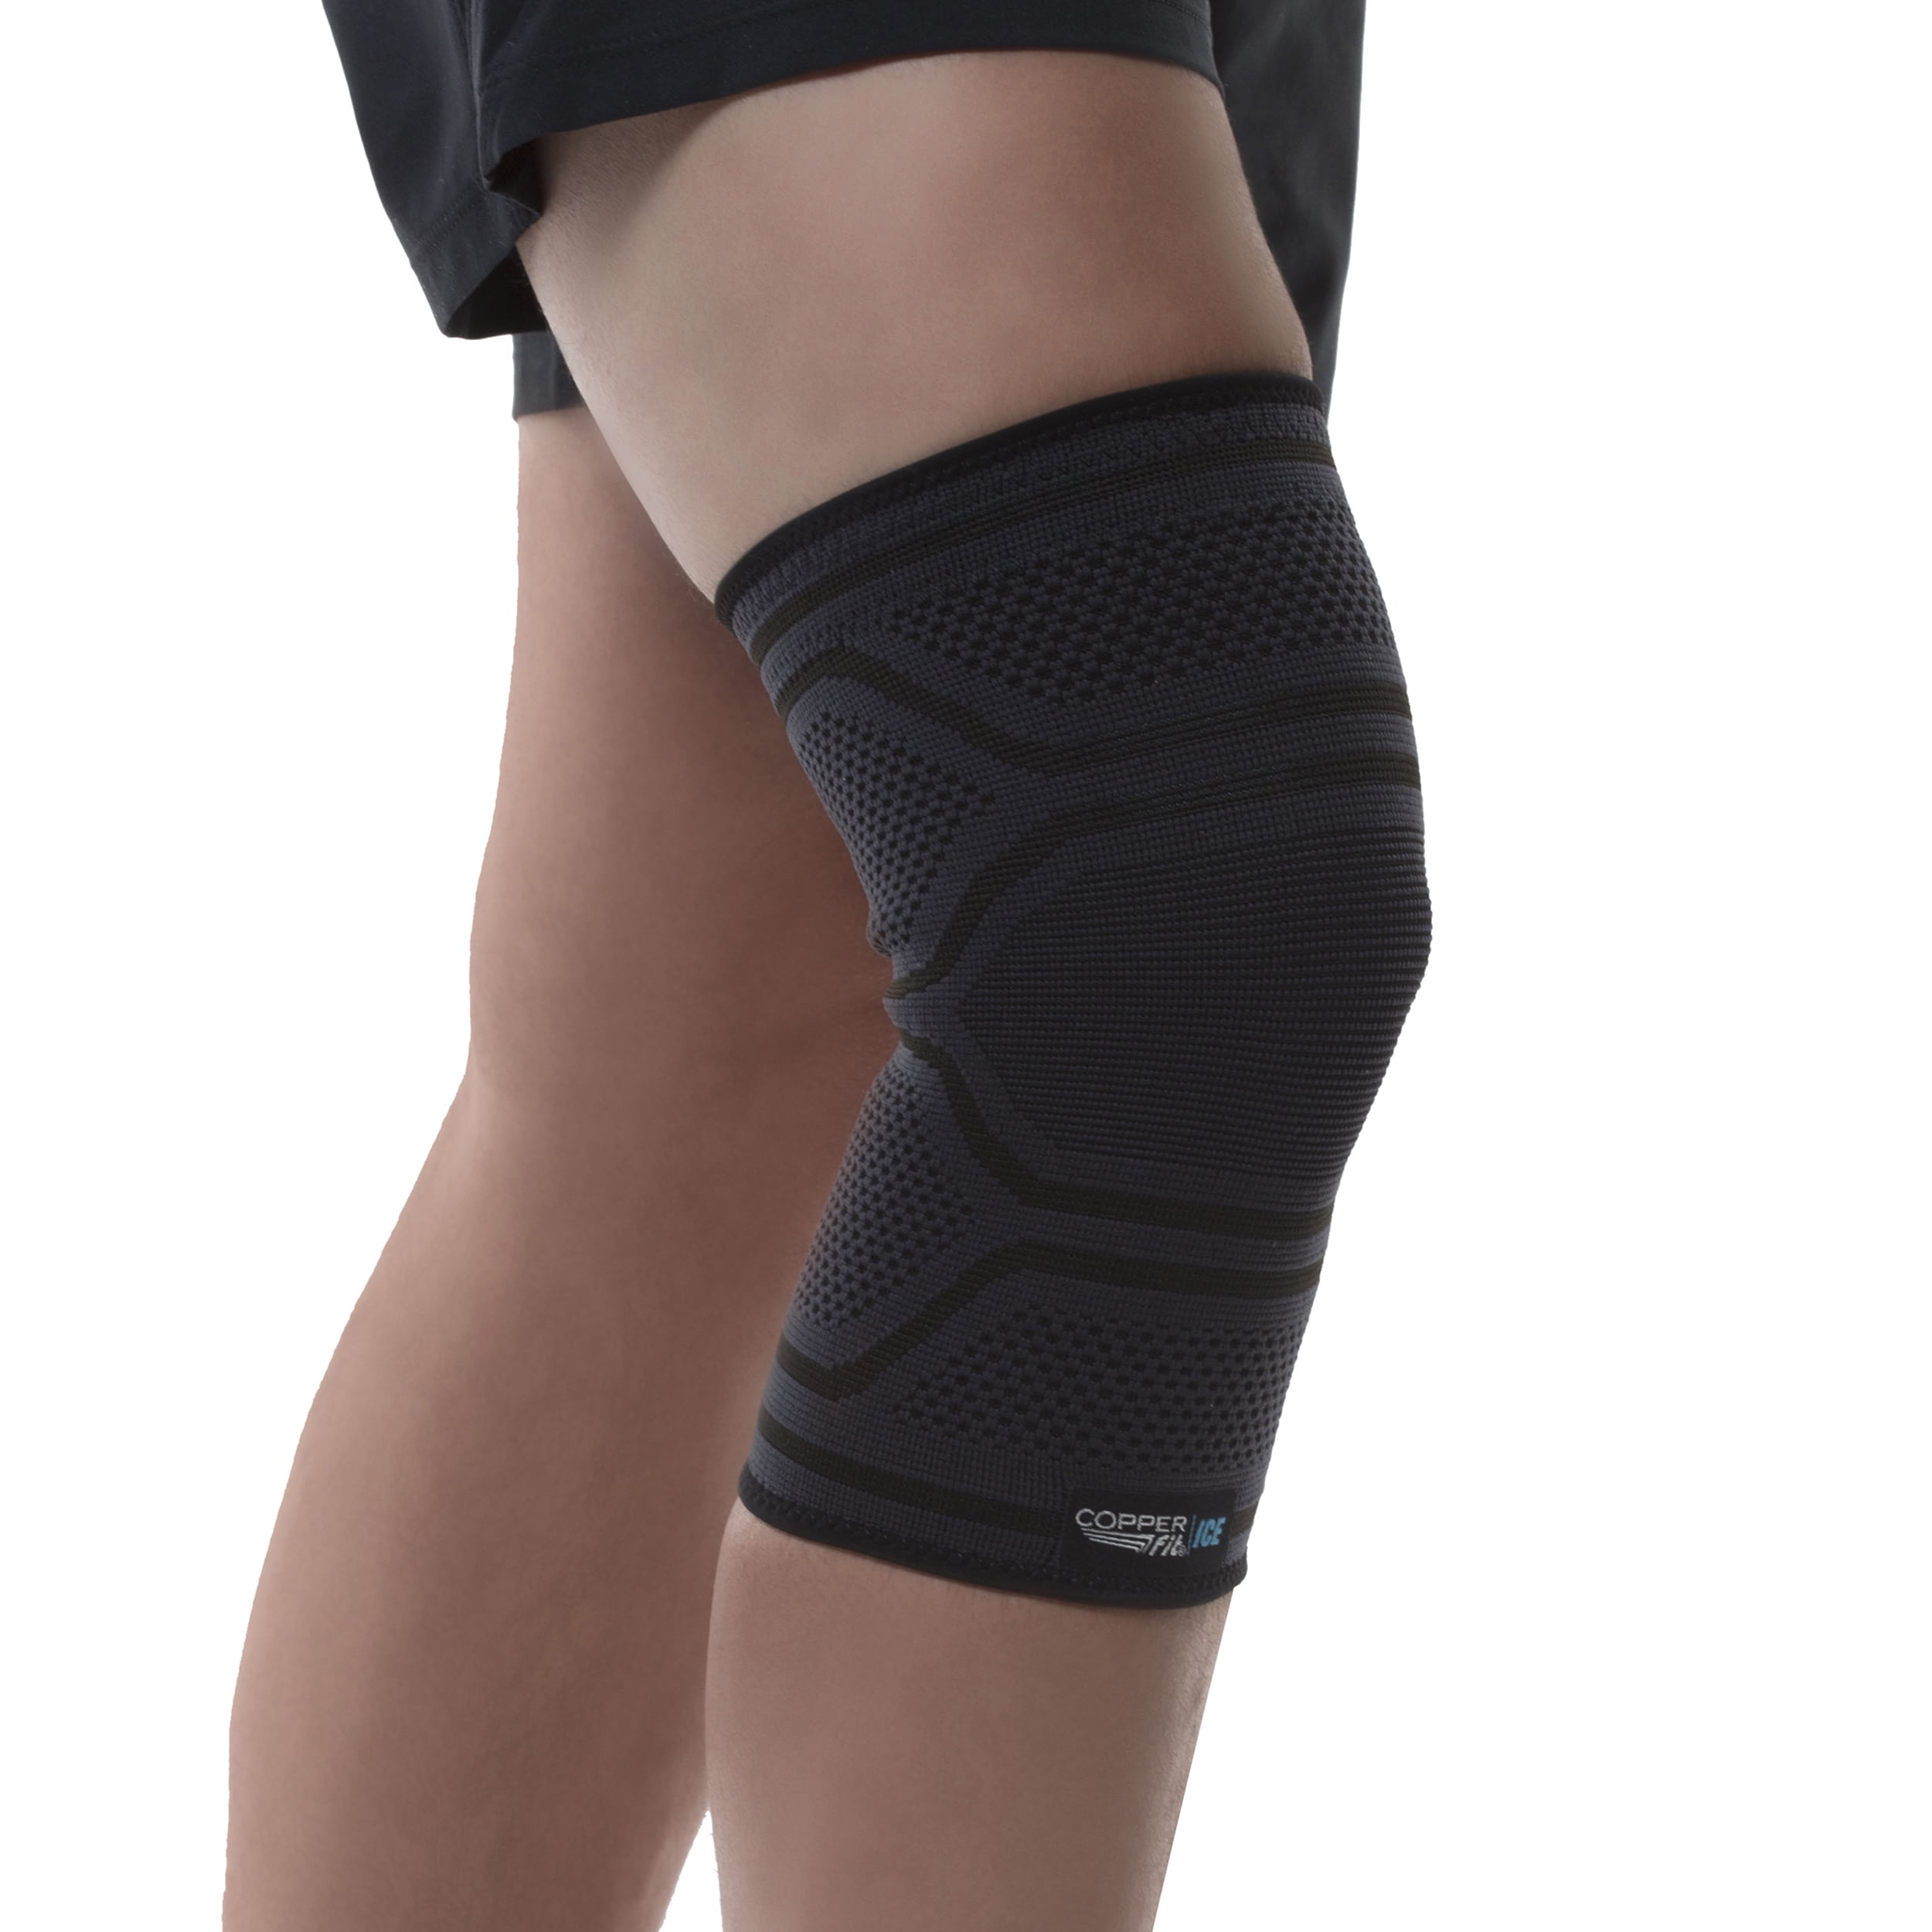 L CopperHealth Copper Performance Compression Knee Sleeve Supports Black Fit 